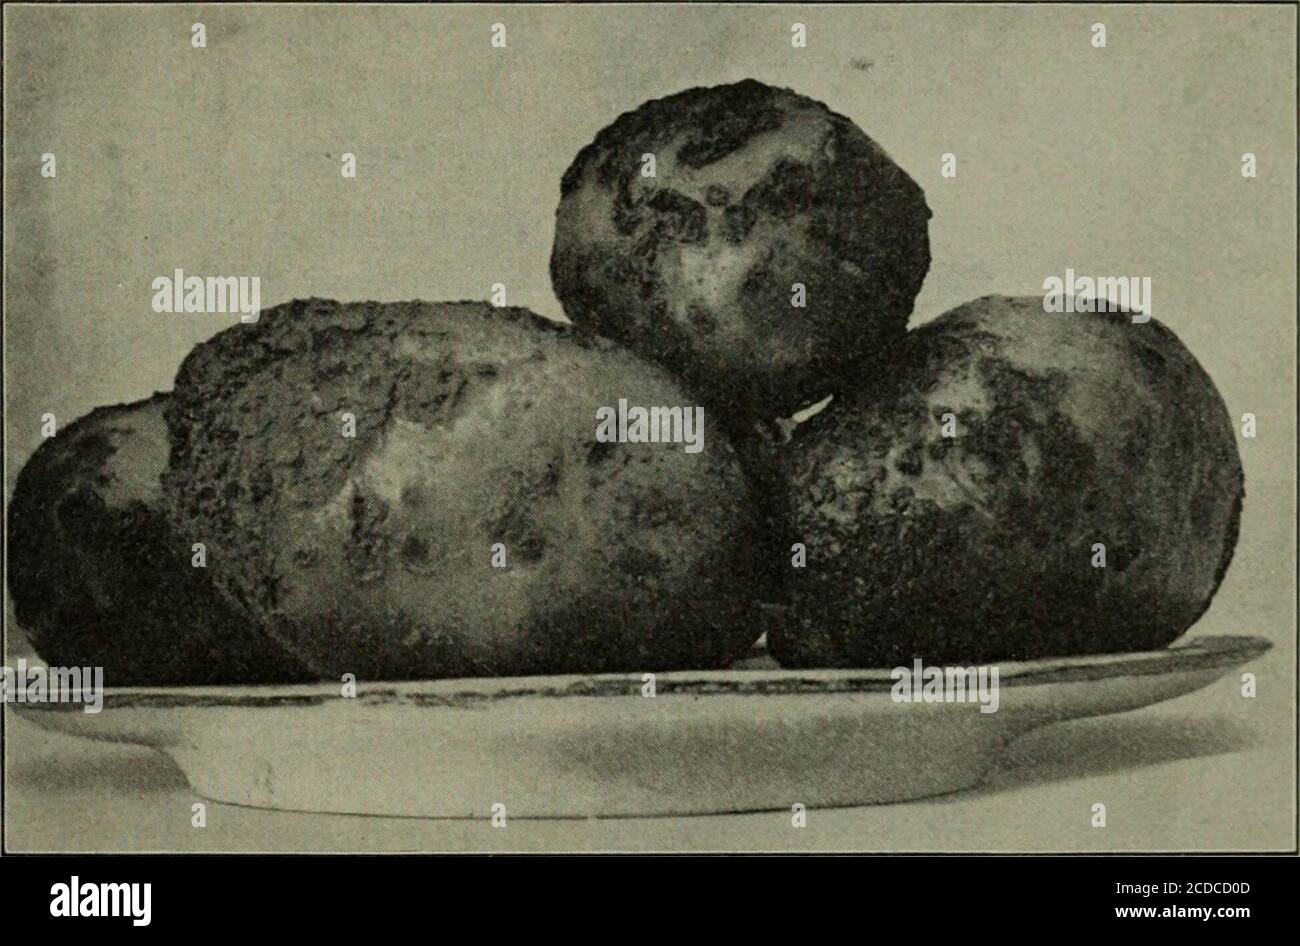 . Fungous diseases of plants, with chapters on physiology, culture methods and technique . oland. The Potato Scab. Conn. Agl. Exp. Sta. (1890):81-95. Thaxter, Roland. The Potato Scab. Conn. Agl. Exp. Sta. (i891): 153-160. The scab of potatoes is a disease which is well known to grow-ers, dealers, and consumers alike, for the conspicuous scab pits orspots on the surface of tubers cannot fail to strike the attention. FUNGI IMPERFECTI 291 The disease is most common throughout the United States, anddoubtless throughout the potato-producing regions of Europe aswell. It is not positively demonstrate Stock Photo